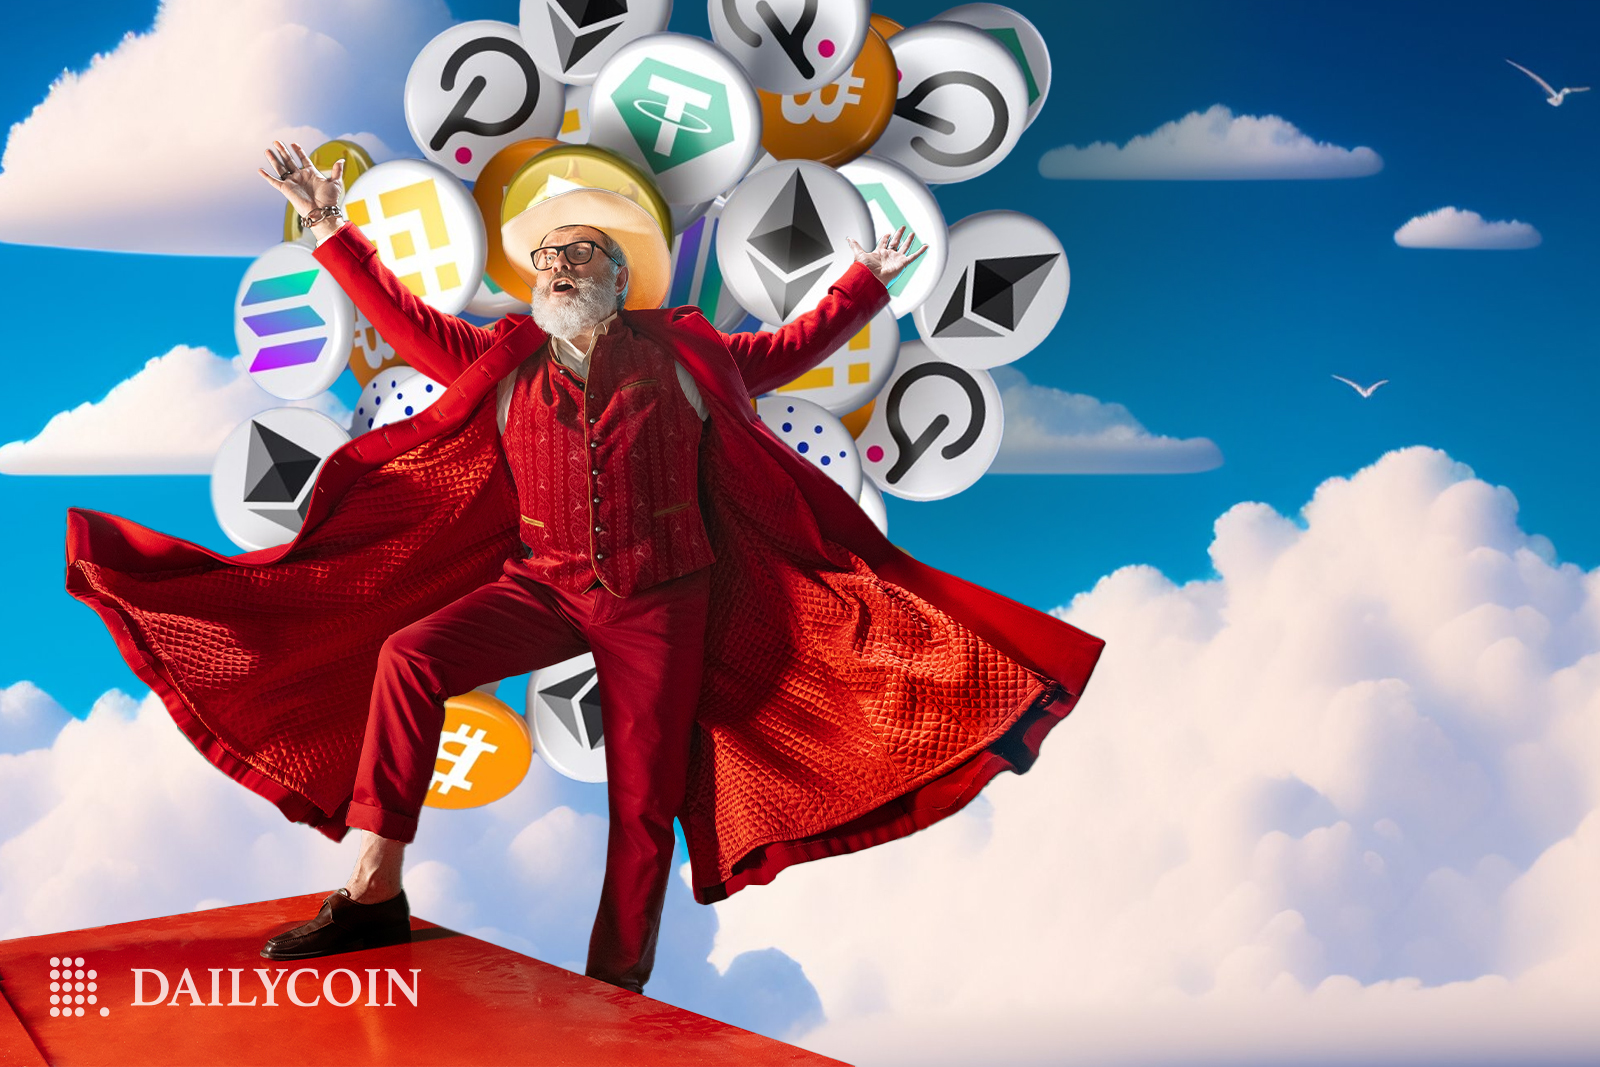 An old man wearing a red costume and an off-white cowboy hat performing on a red platform in front of a bunch of altcoins.